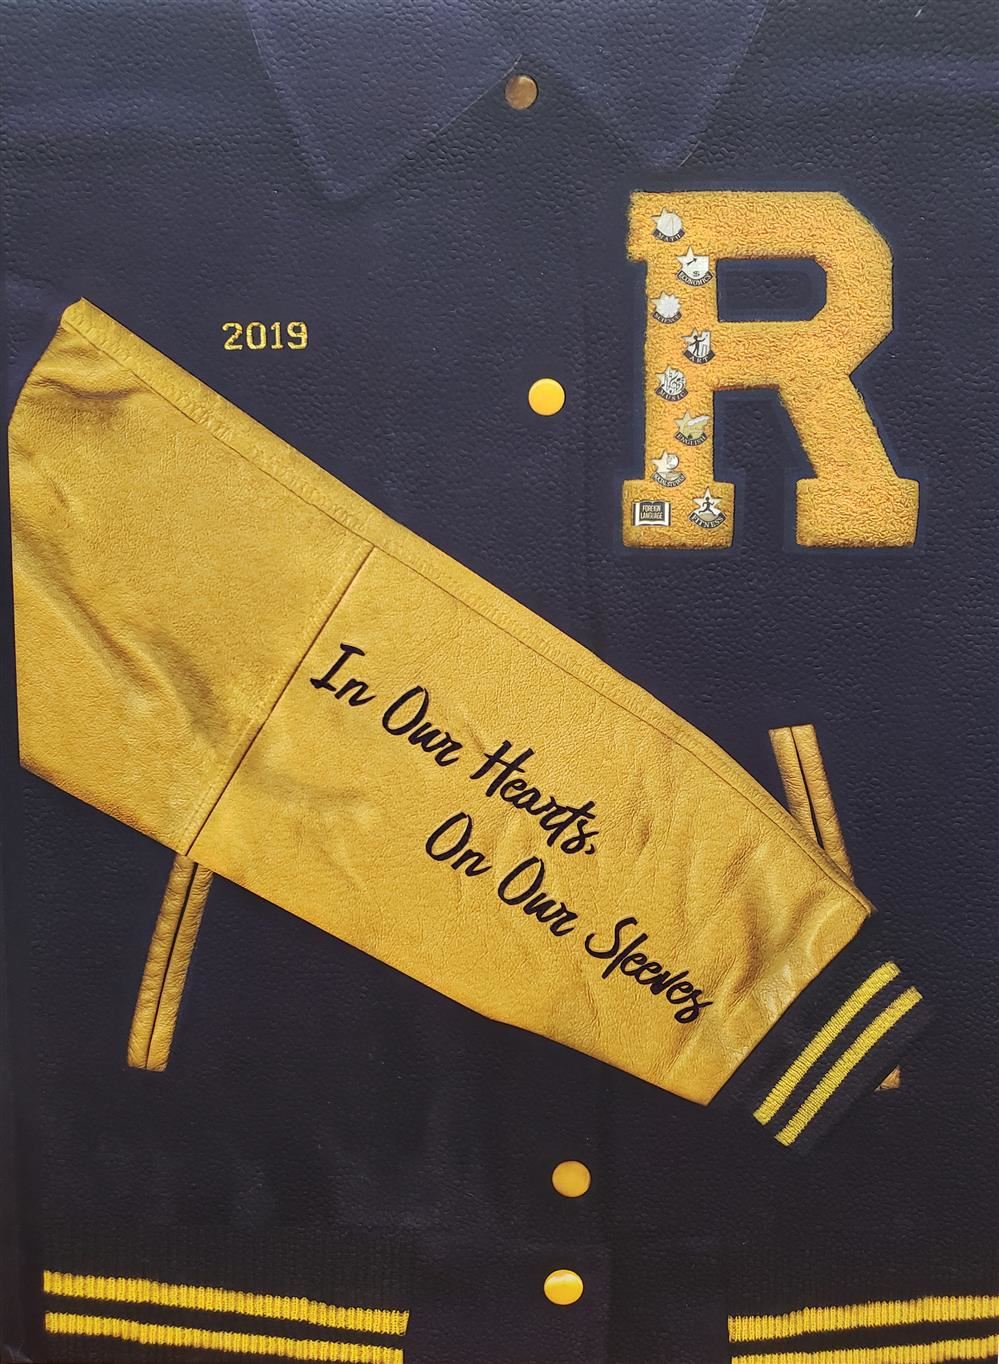 2018-2019 Yearbook Cover